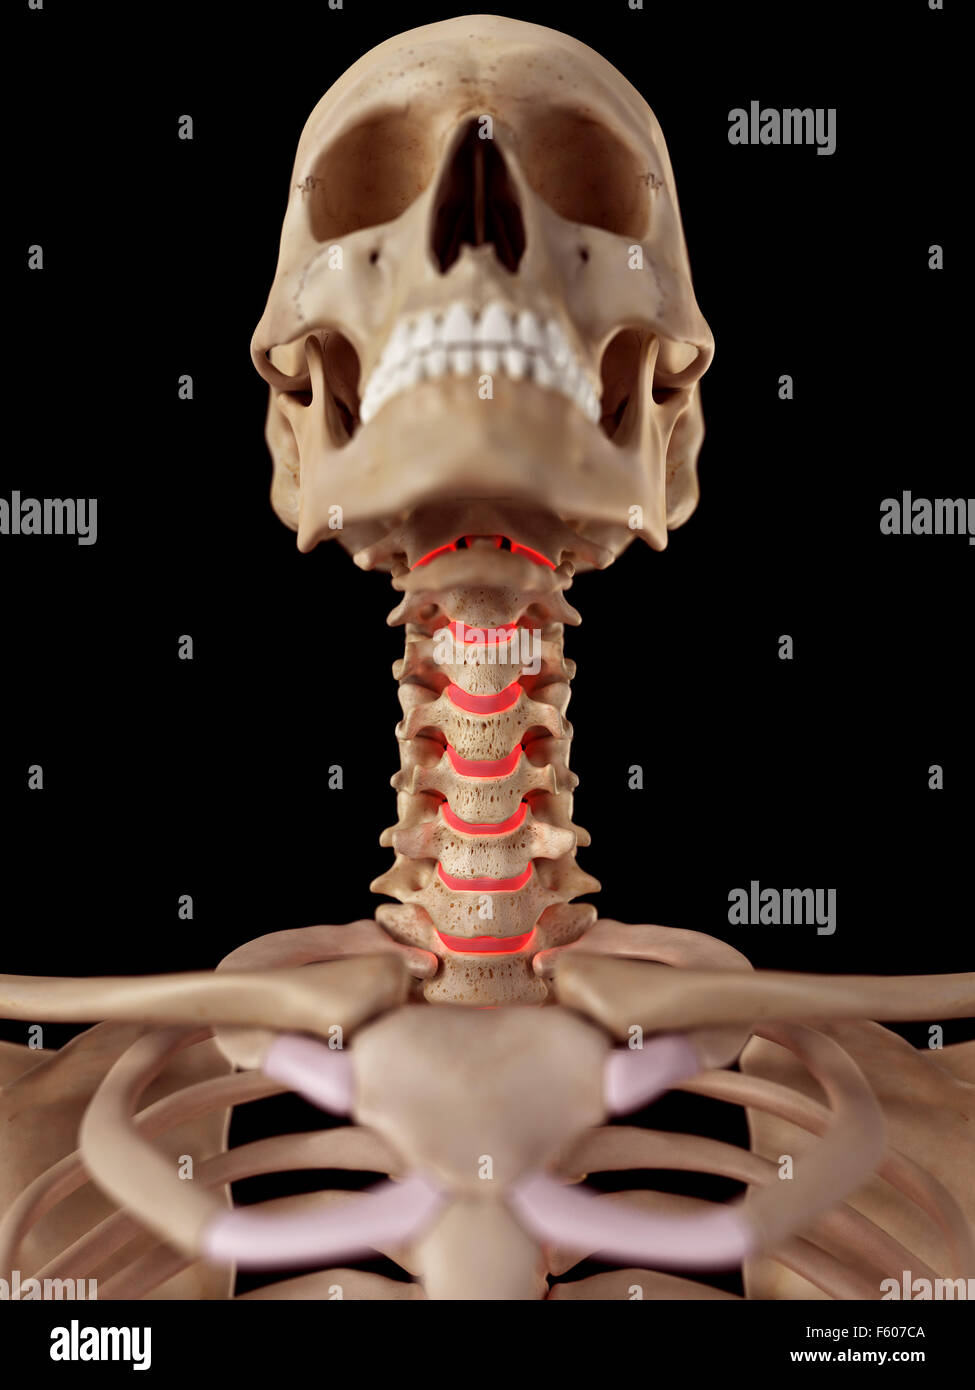 medical accurate illustration of the intervertebral discs Stock Photo